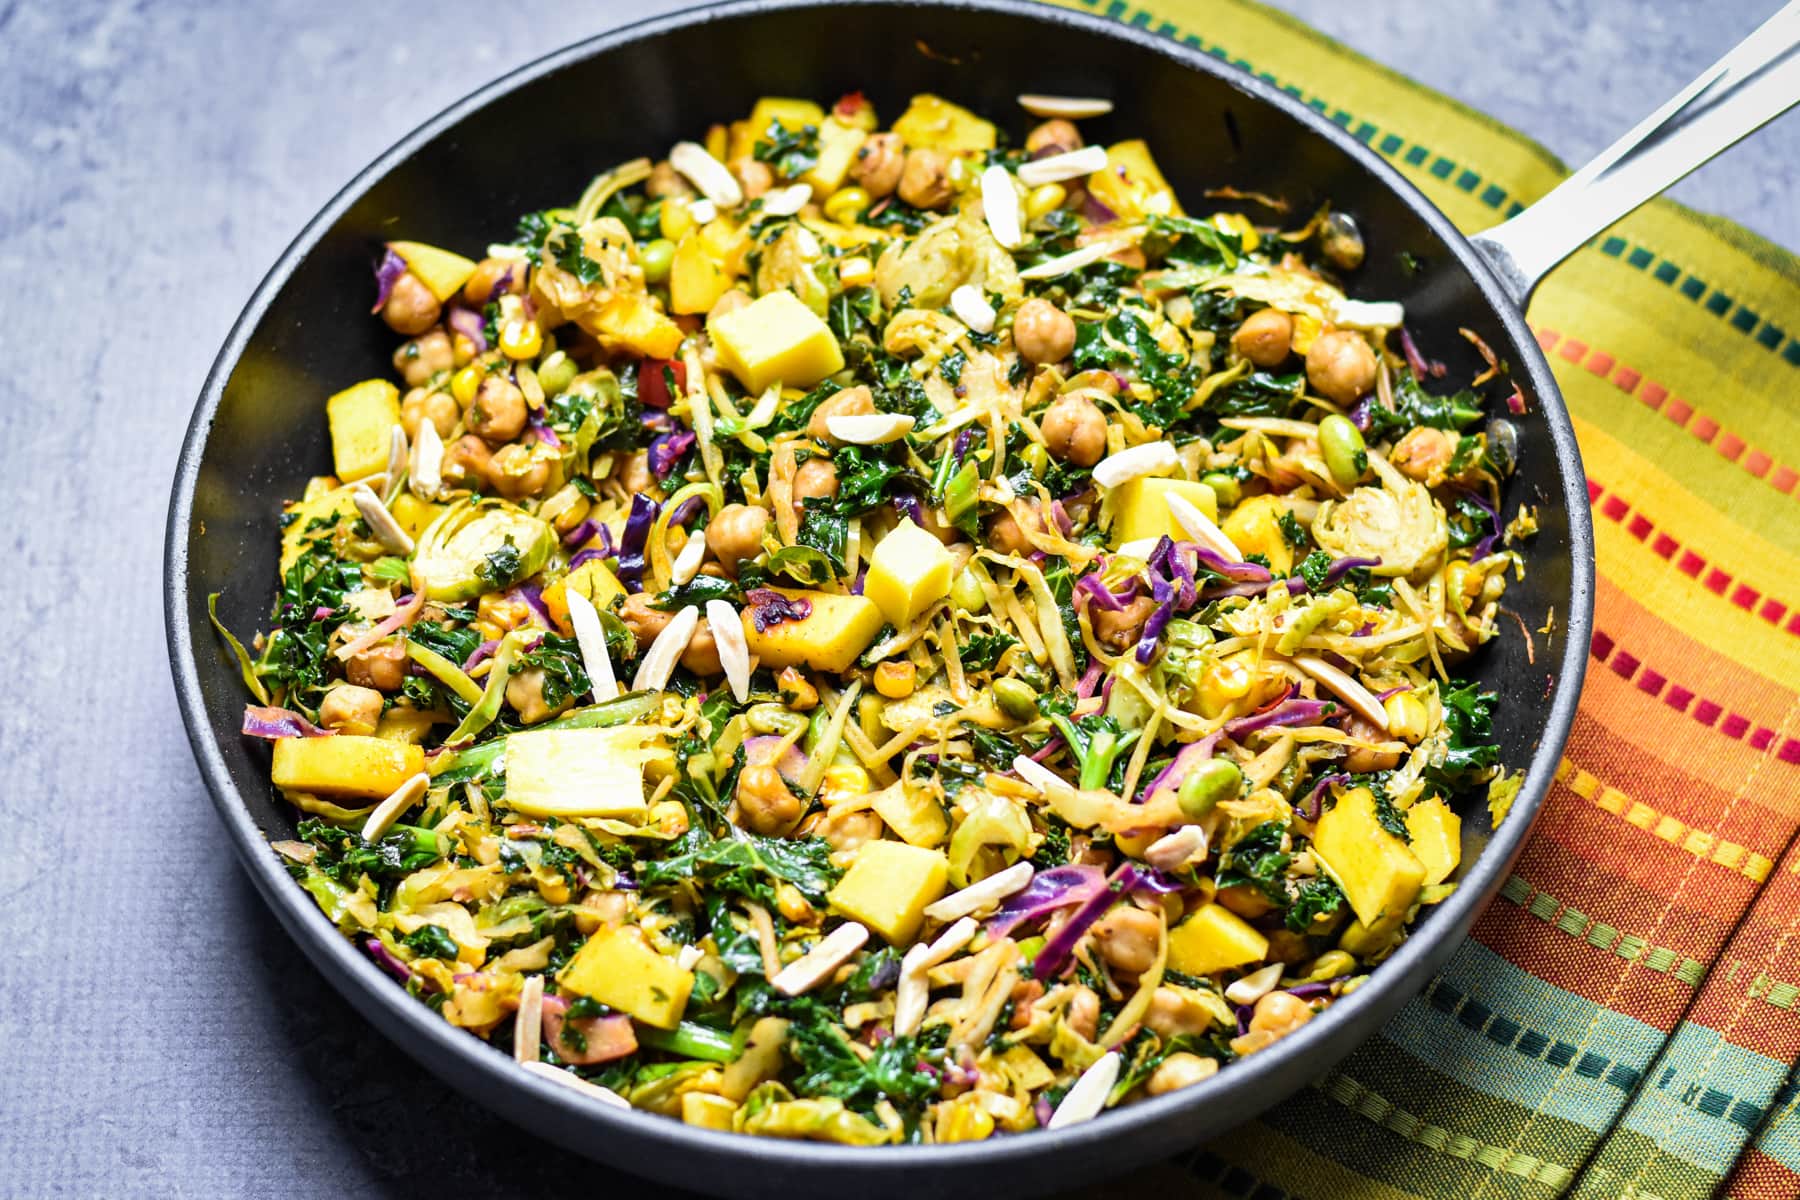 Kale and chickpea salad with mango in a frying pan